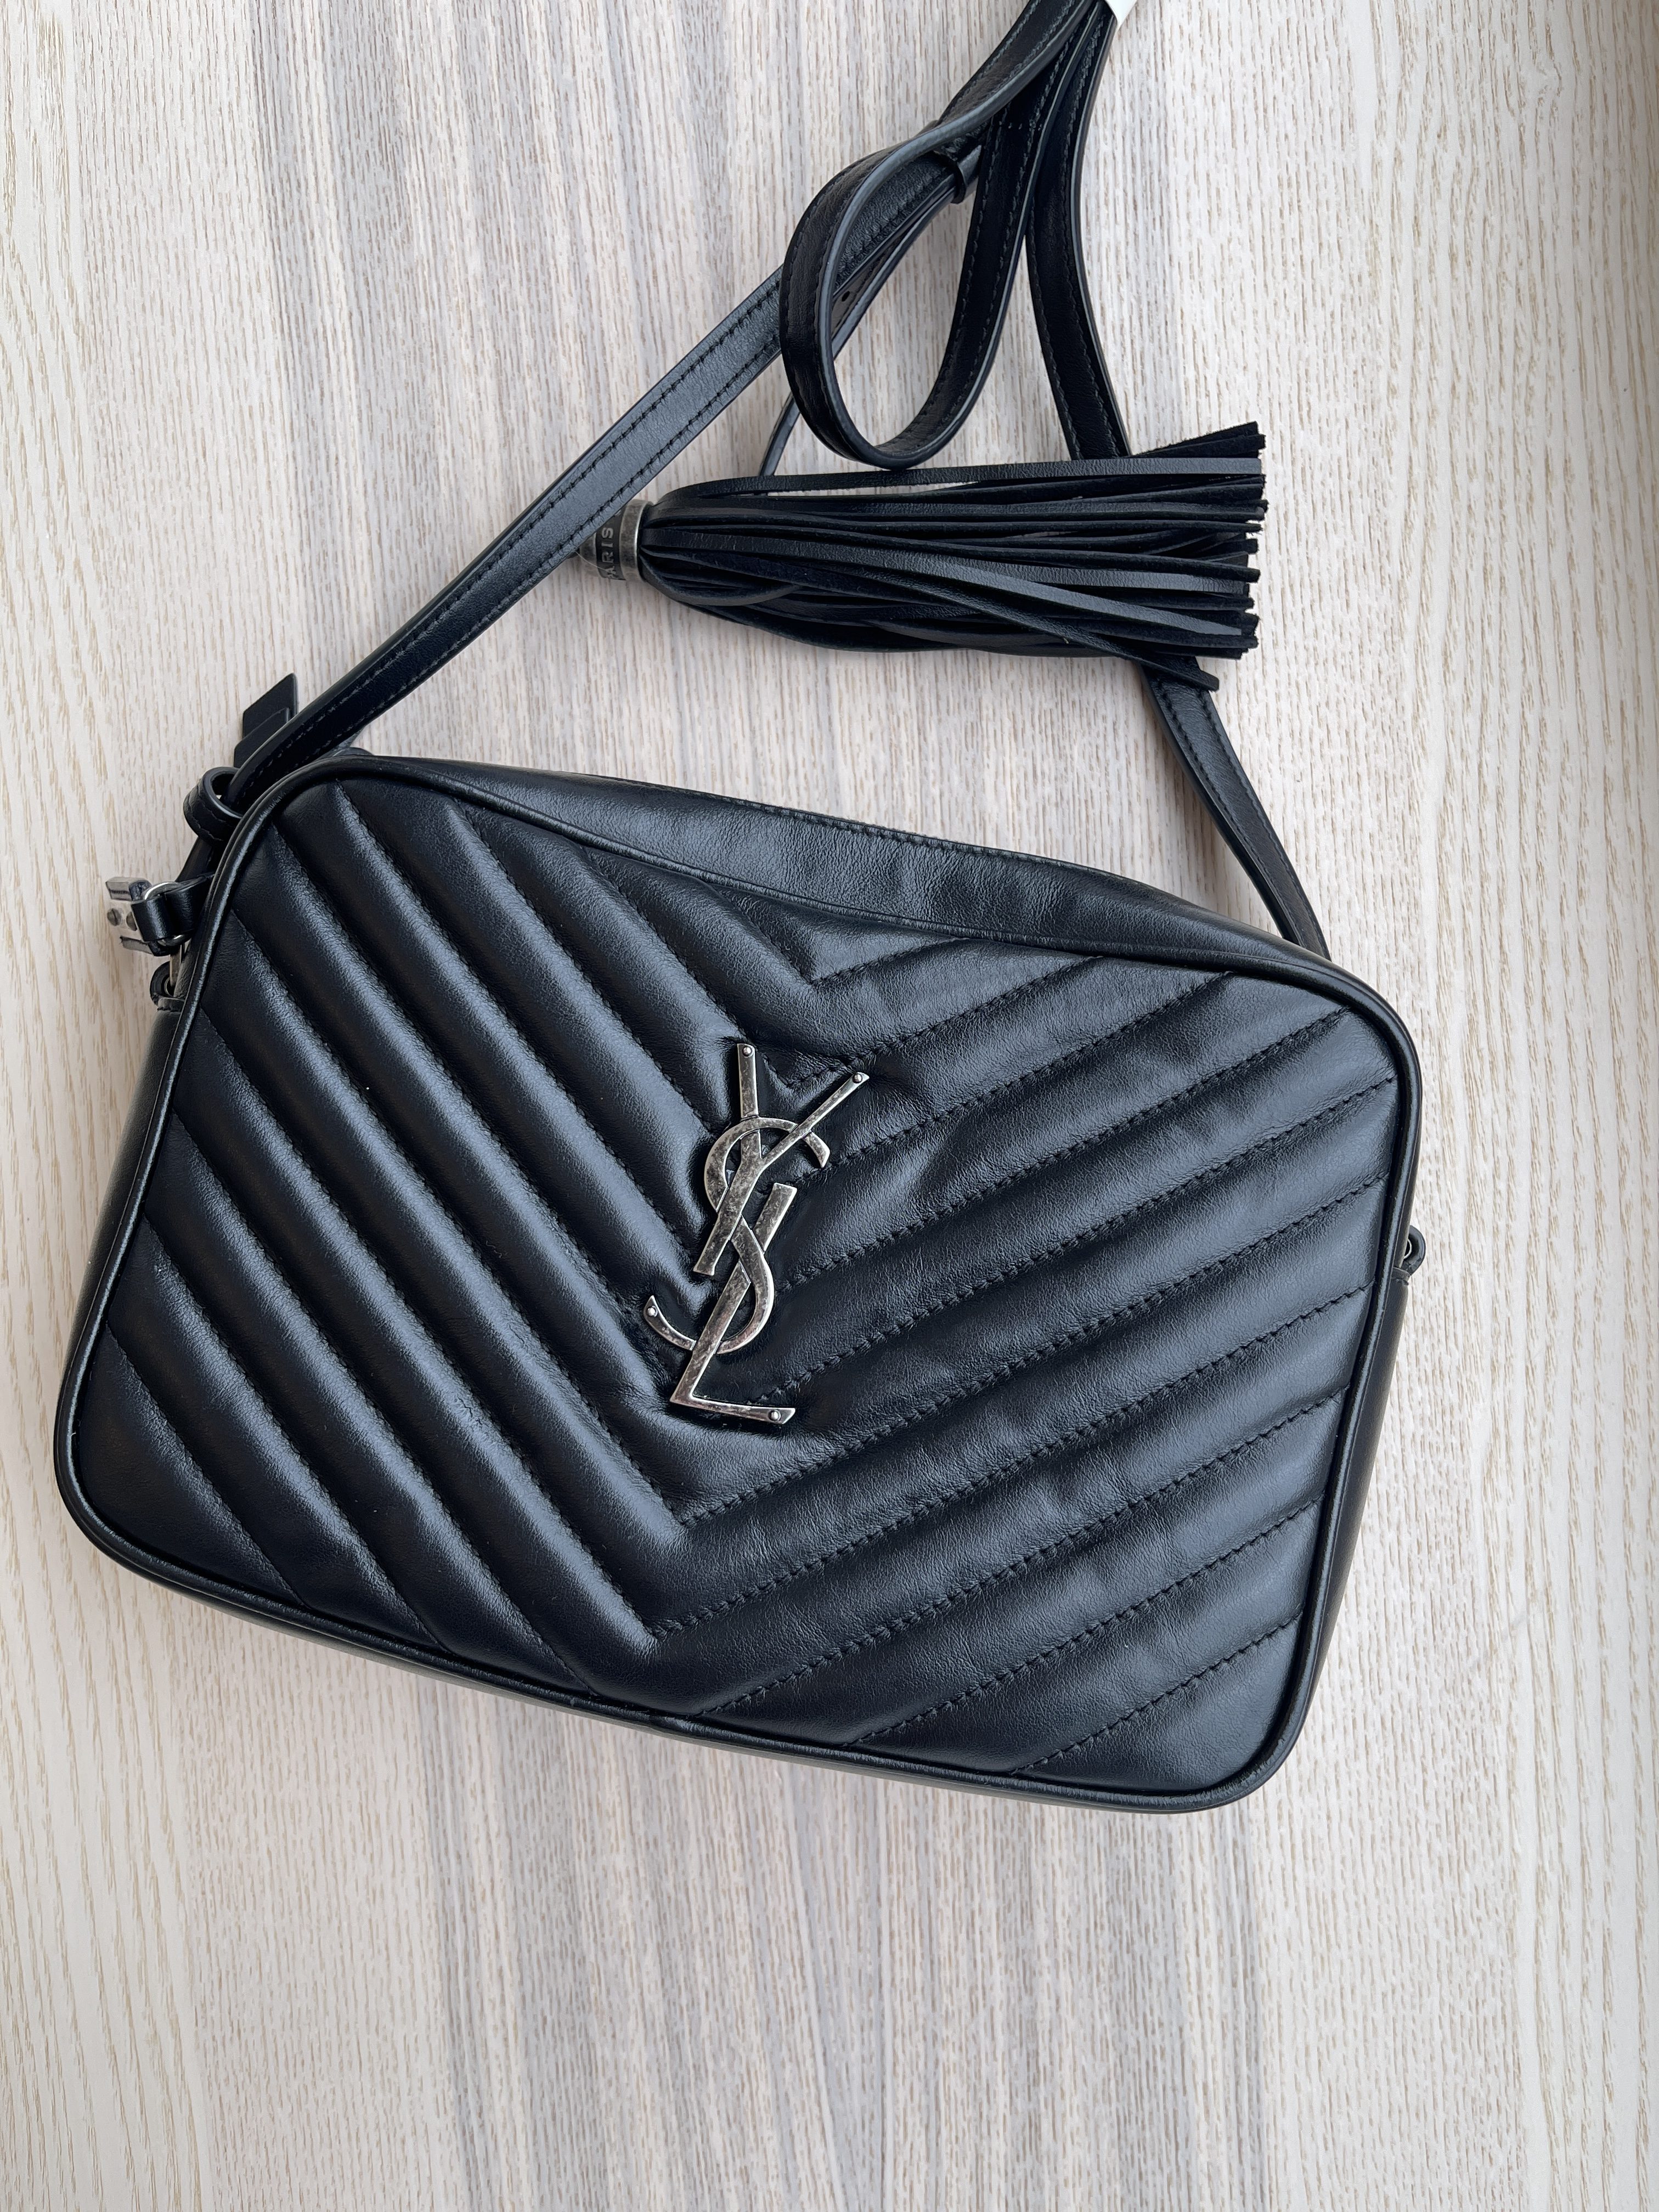 Saint Laurent Small Lou Lou bag in Black with Silver Hardware – Love A  Preloved